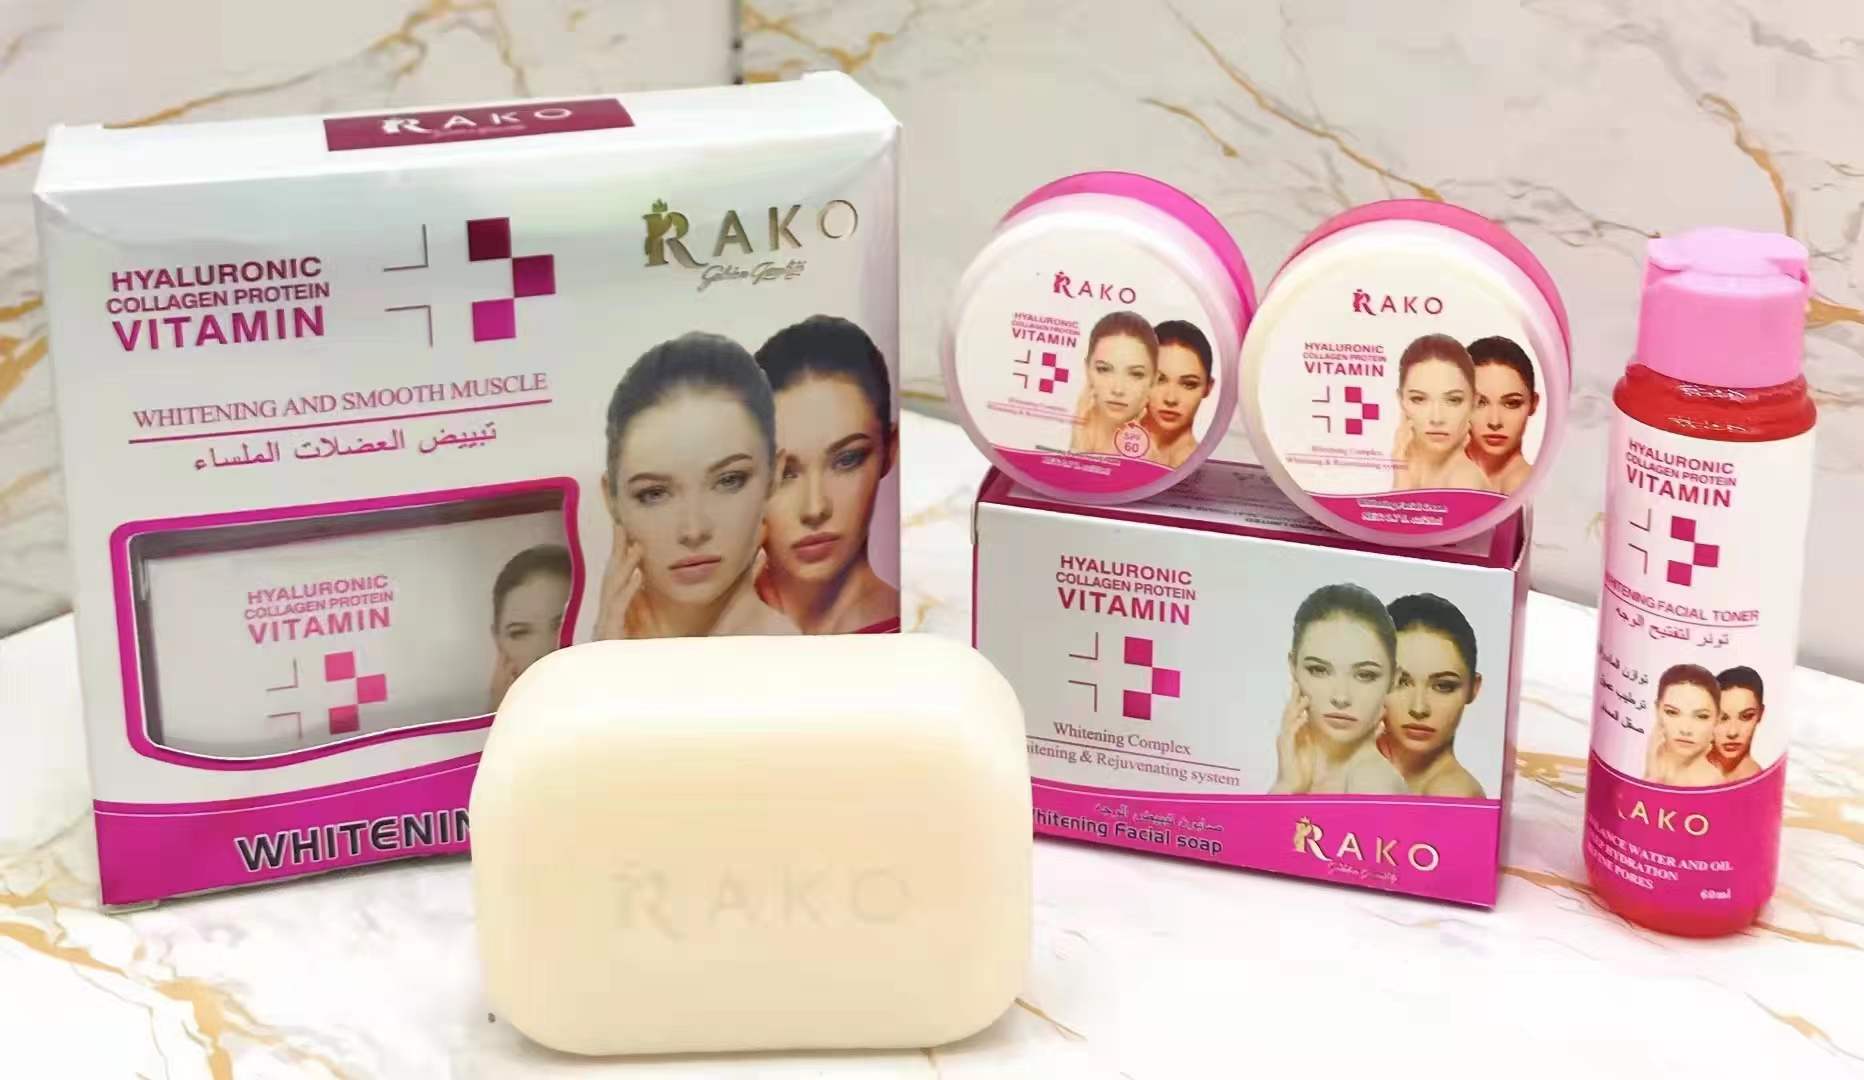 Rako Hyaluronic Collagen Protein Vitamin Whitening & Smooth Muscle Facial Set